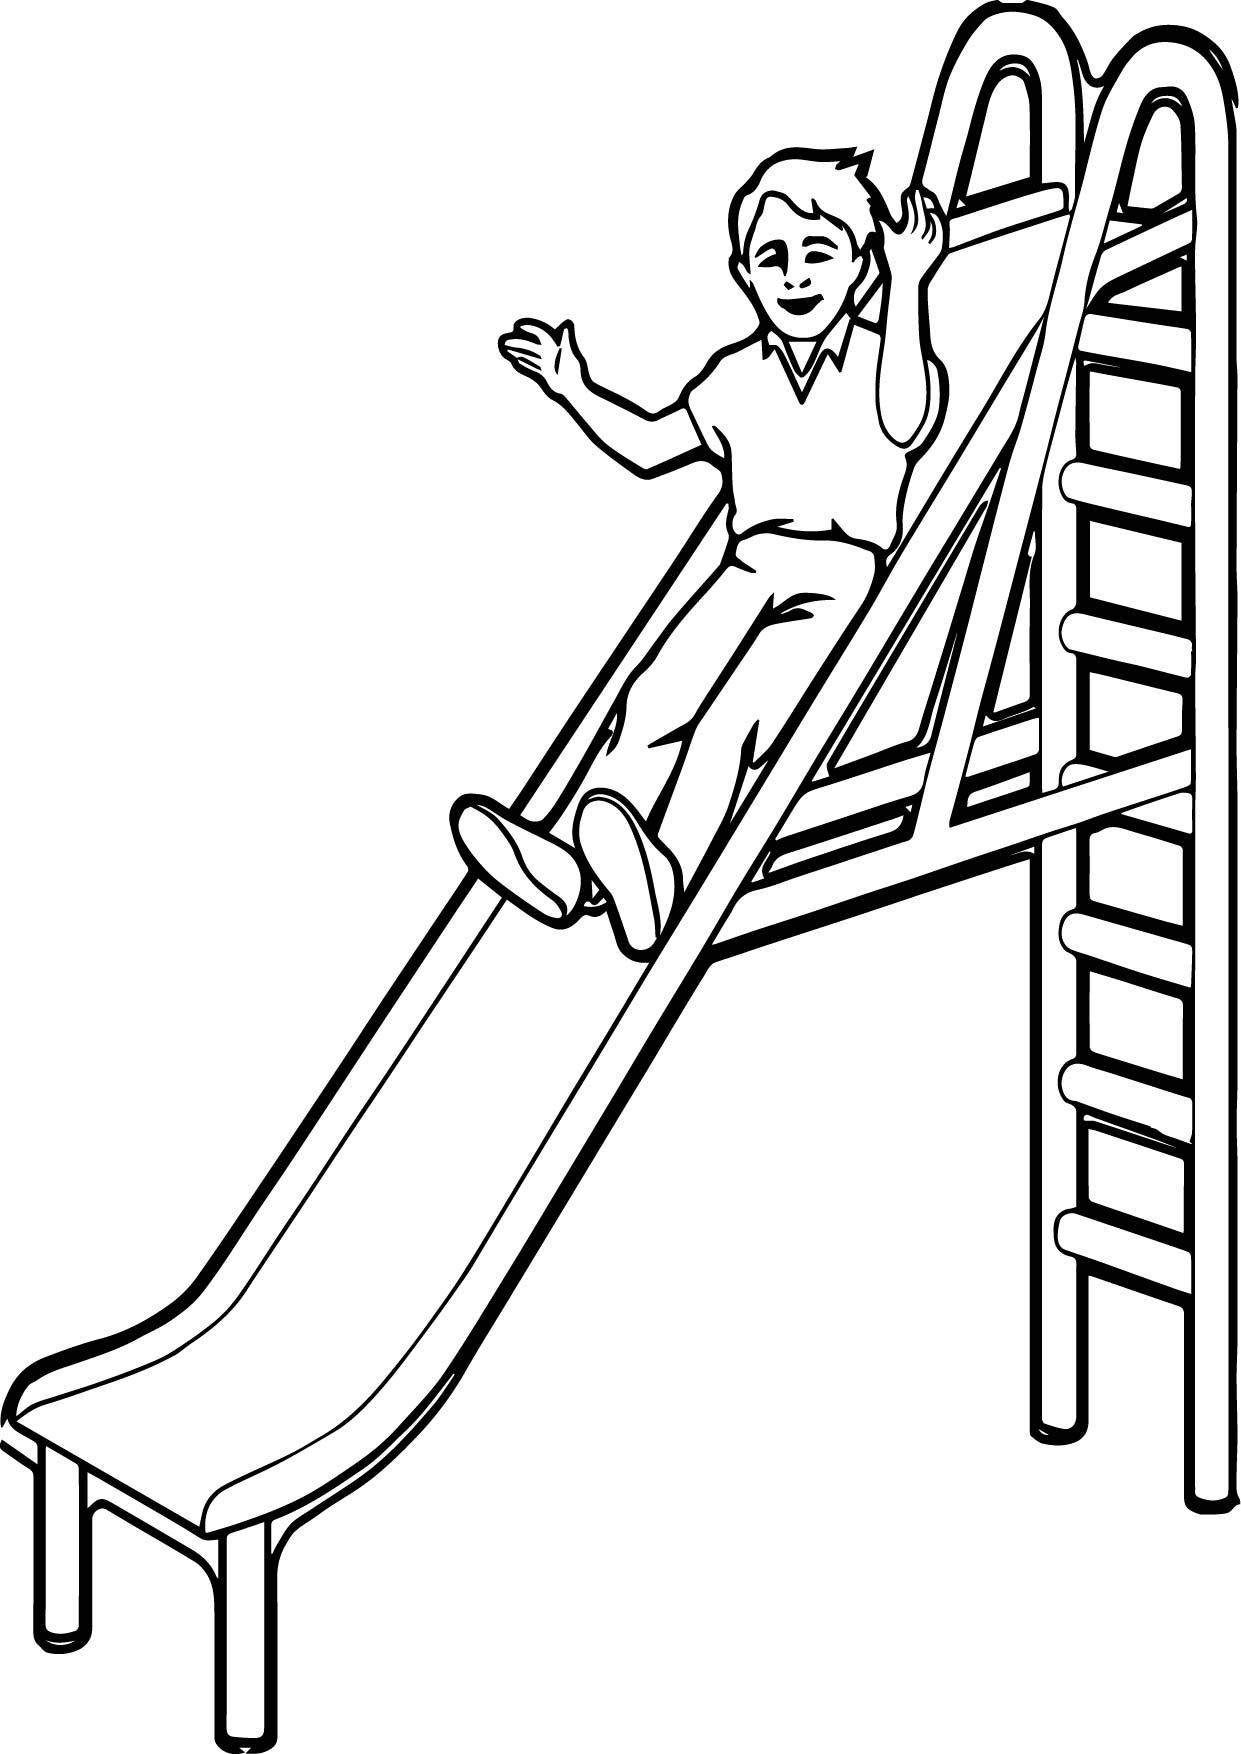 awesome Playground Slide Kid Coloring Page | Coloring pages ...